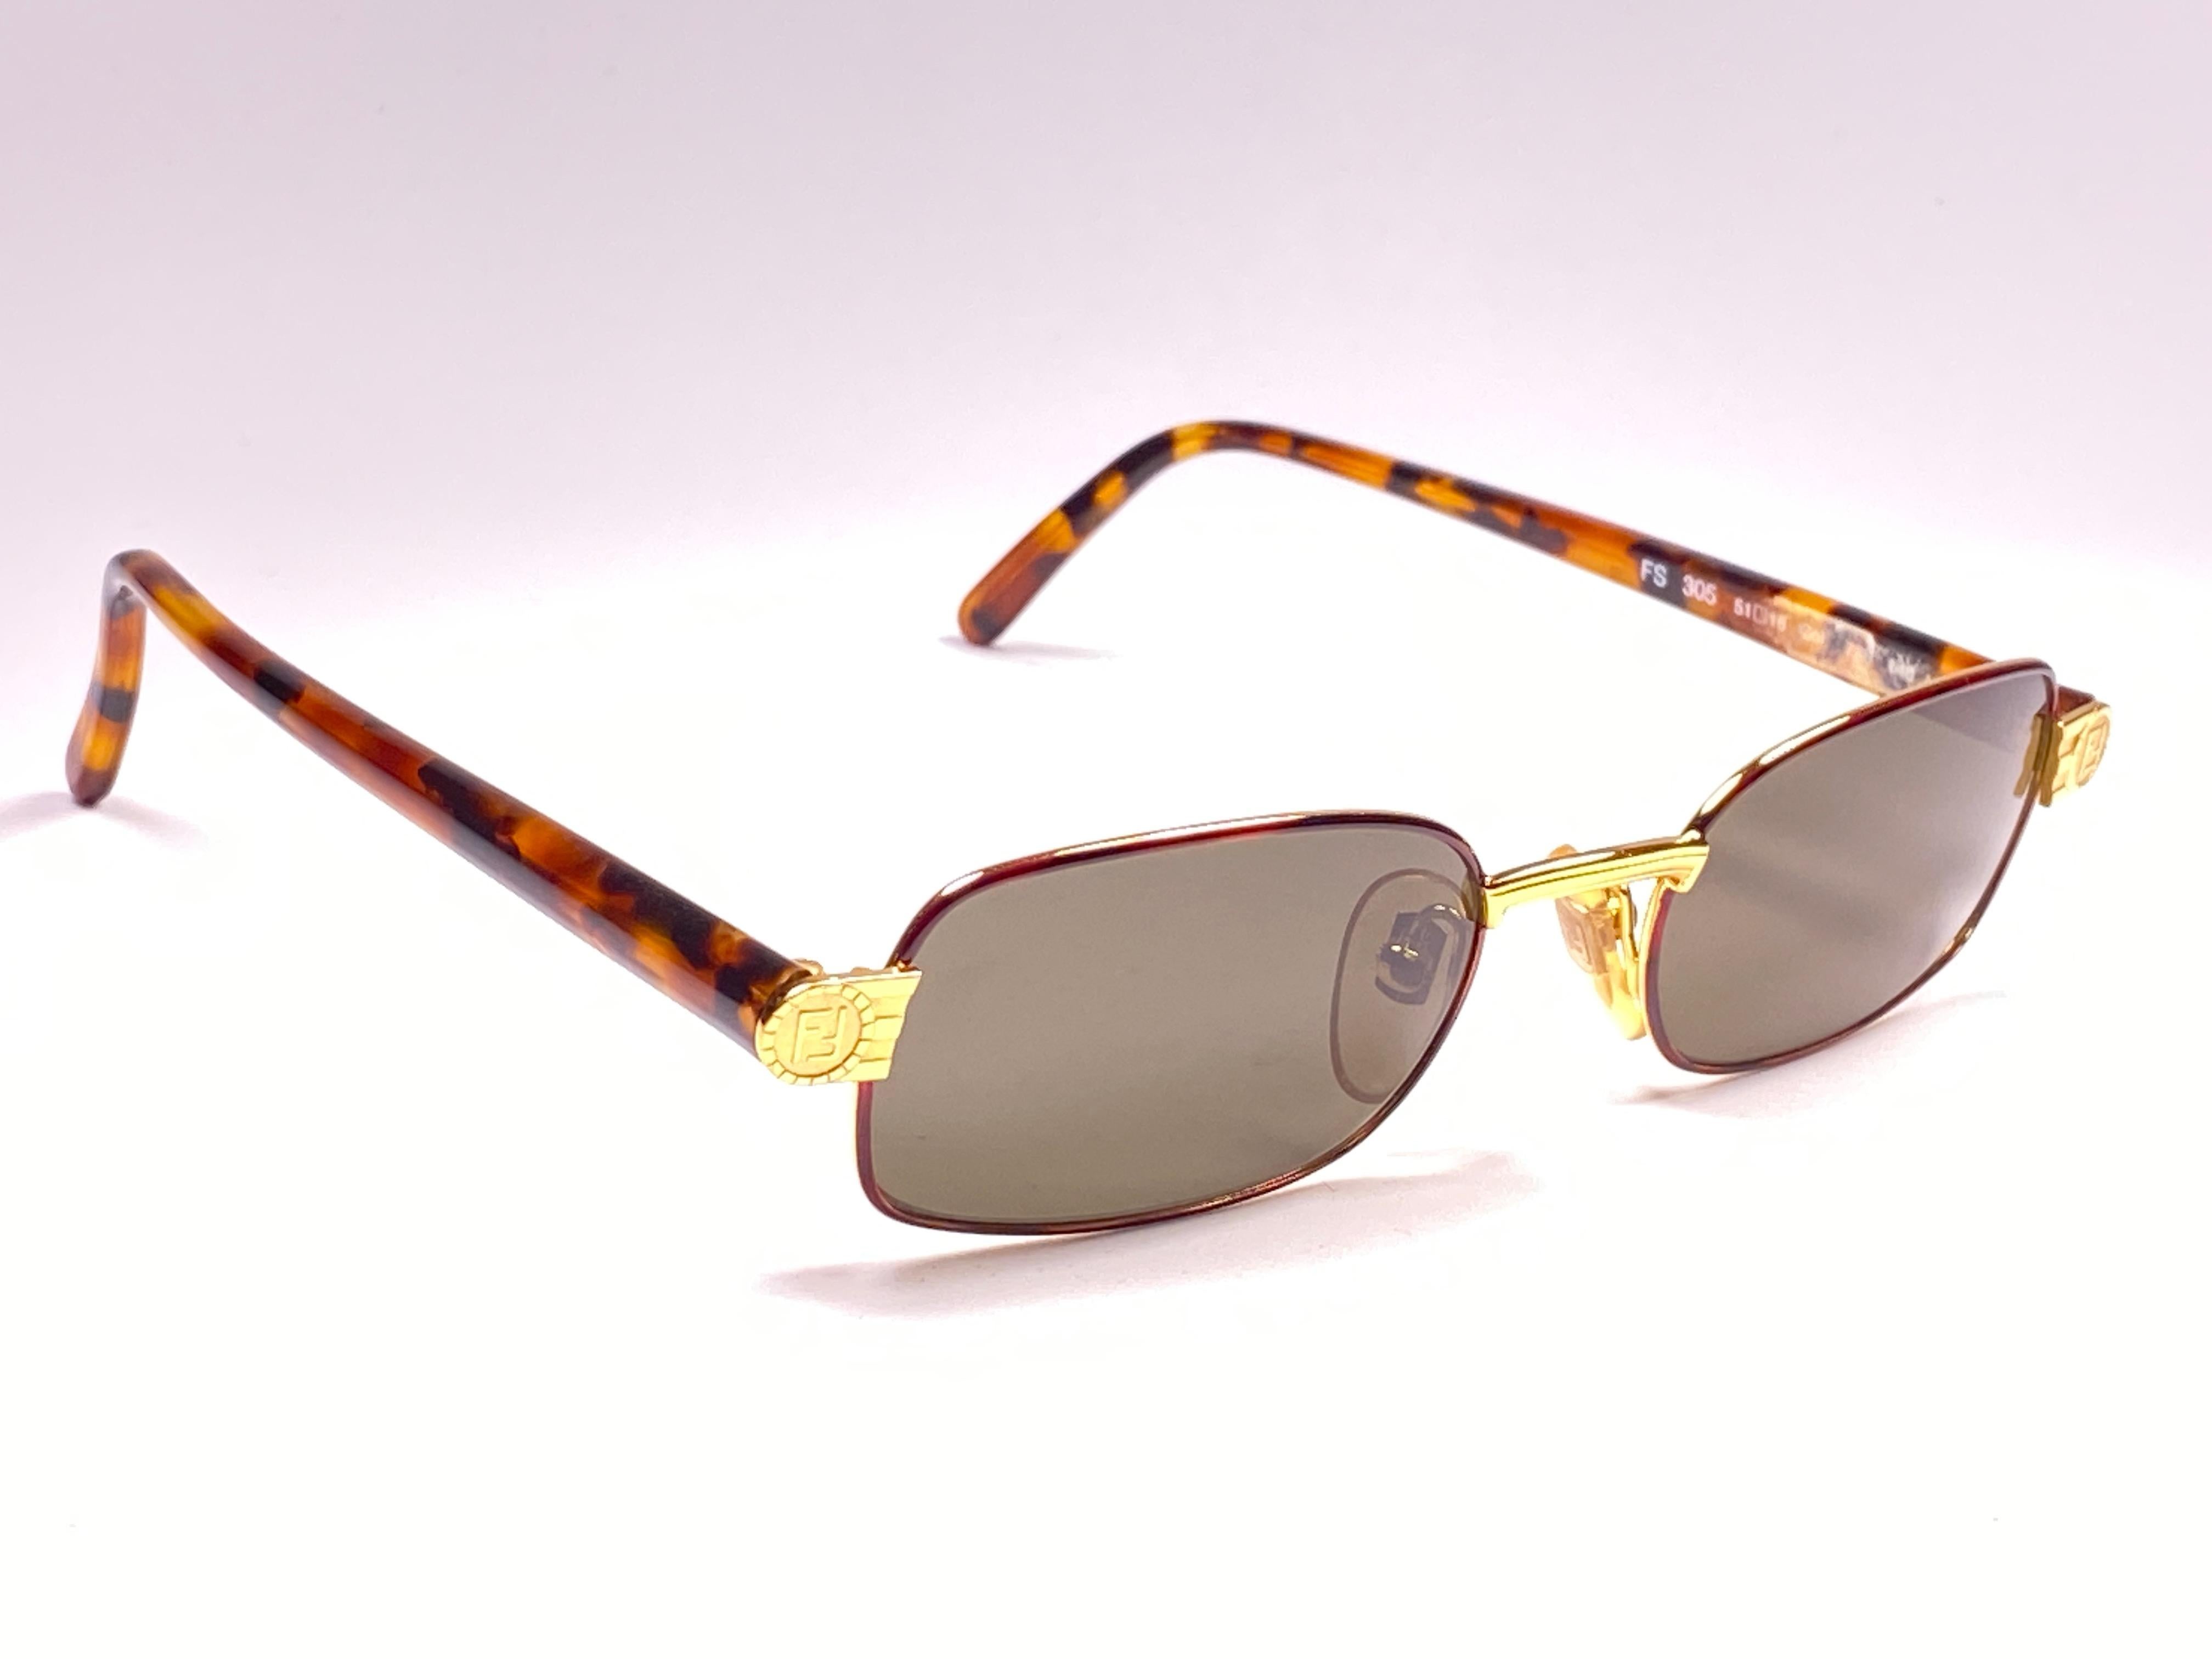 New Fendi rectangular gold matte oval frame with solid grey ( UV protection ) lenses.

Made in Italy.
 
Produced and design in 1990's.

New, never worn or displayed. this  item may show minor sign of wear due to storage.